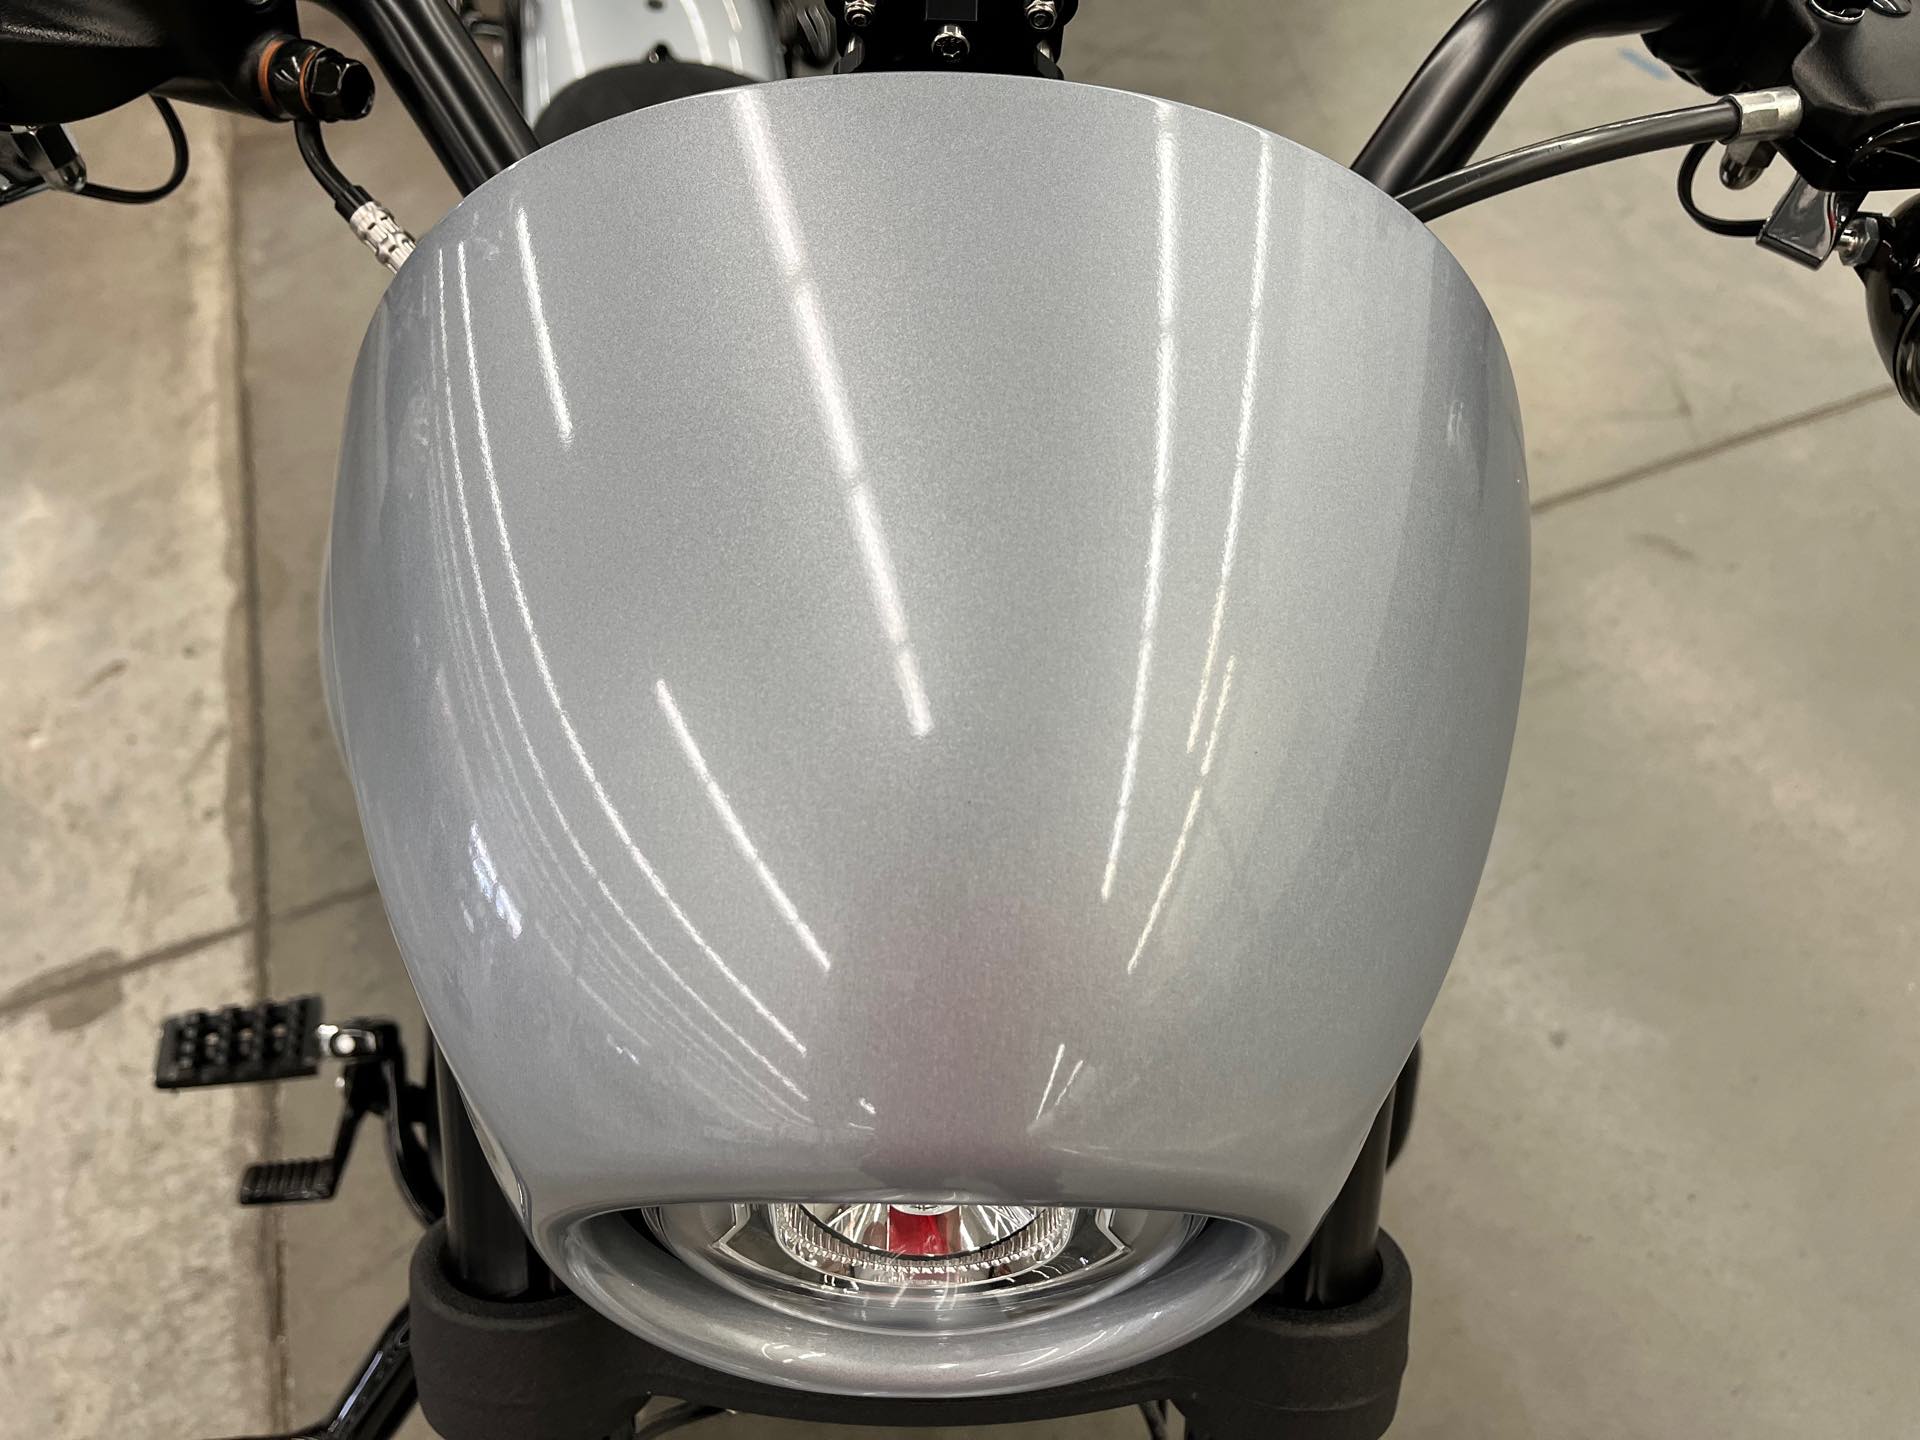 2020 Harley-Davidson Softail Low Rider S at Aces Motorcycles - Denver